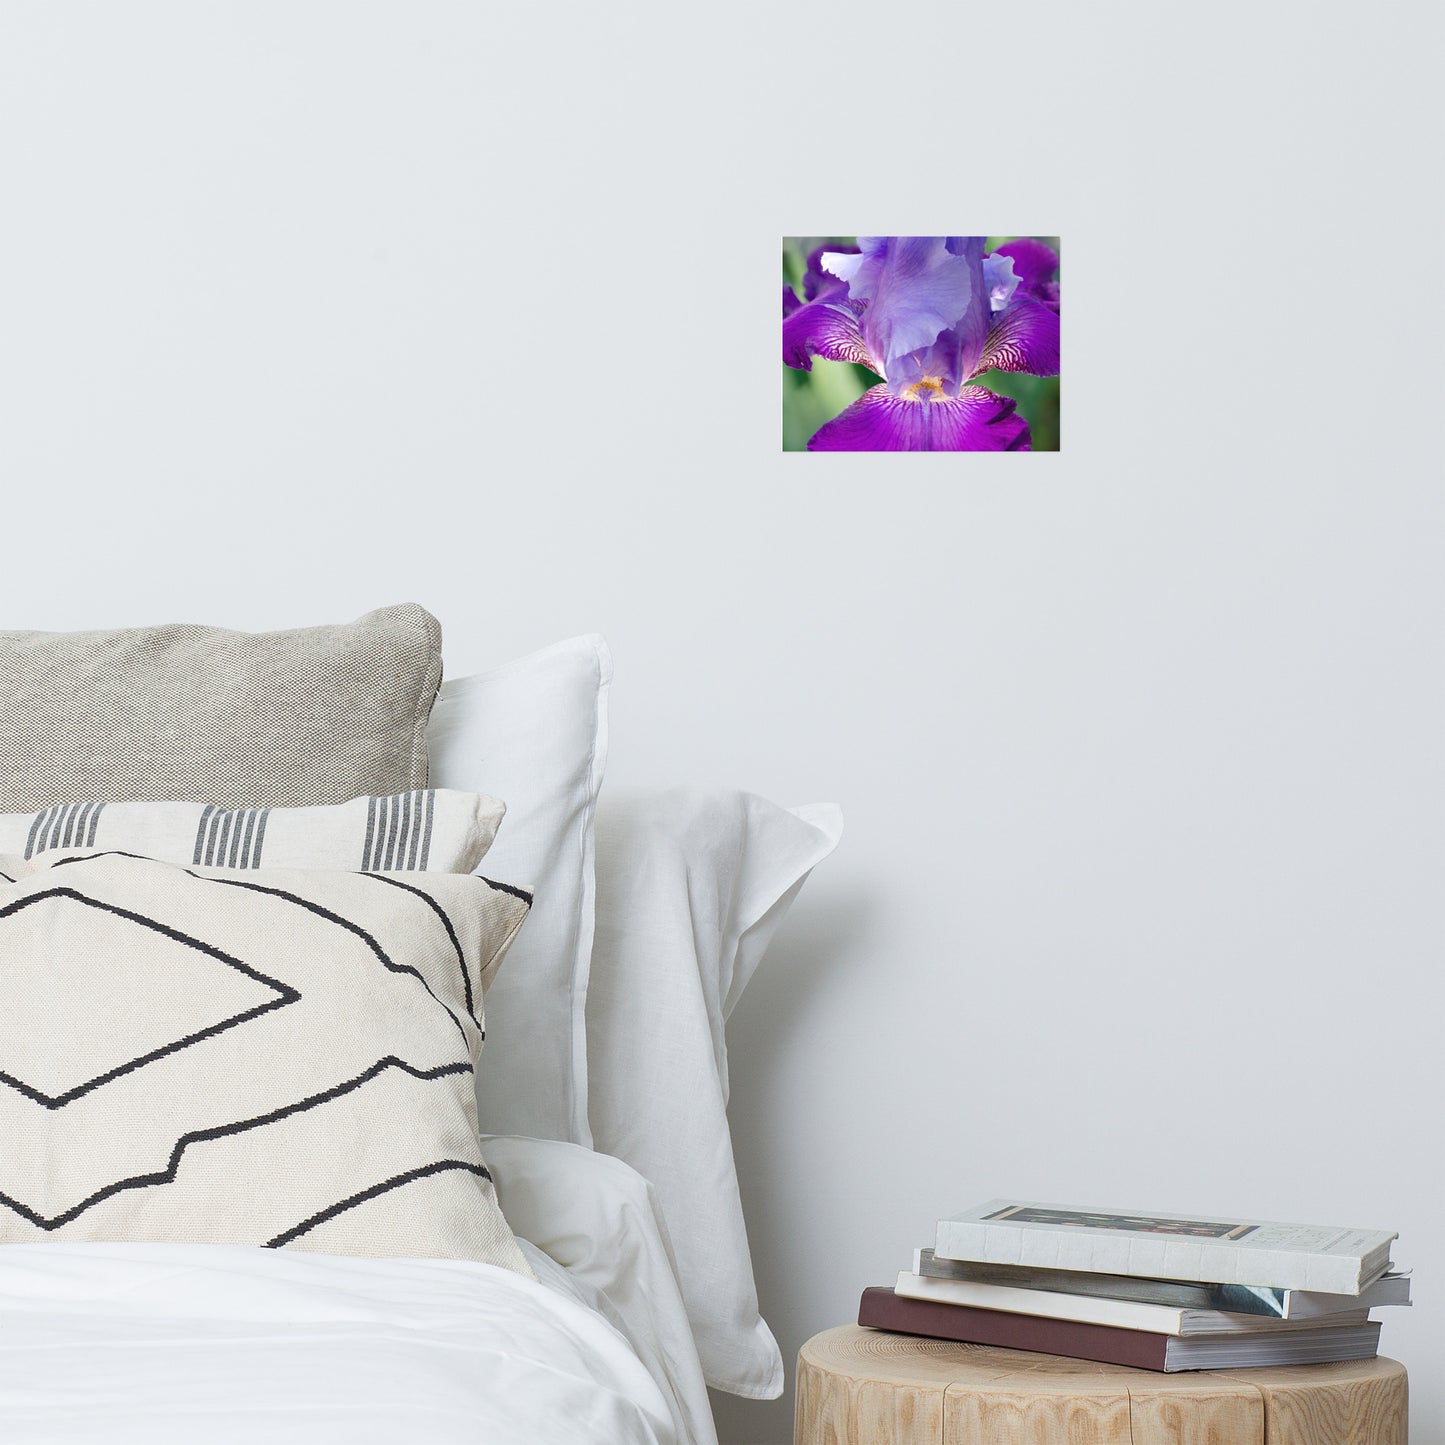 Big Wall Posters For Bedroom: Glowing Iris - Botanical / Floral / Flora / Flowers / Nature Photograph - Loose / Frameable / Unframed / Frameless Wall Art Print - Artwork